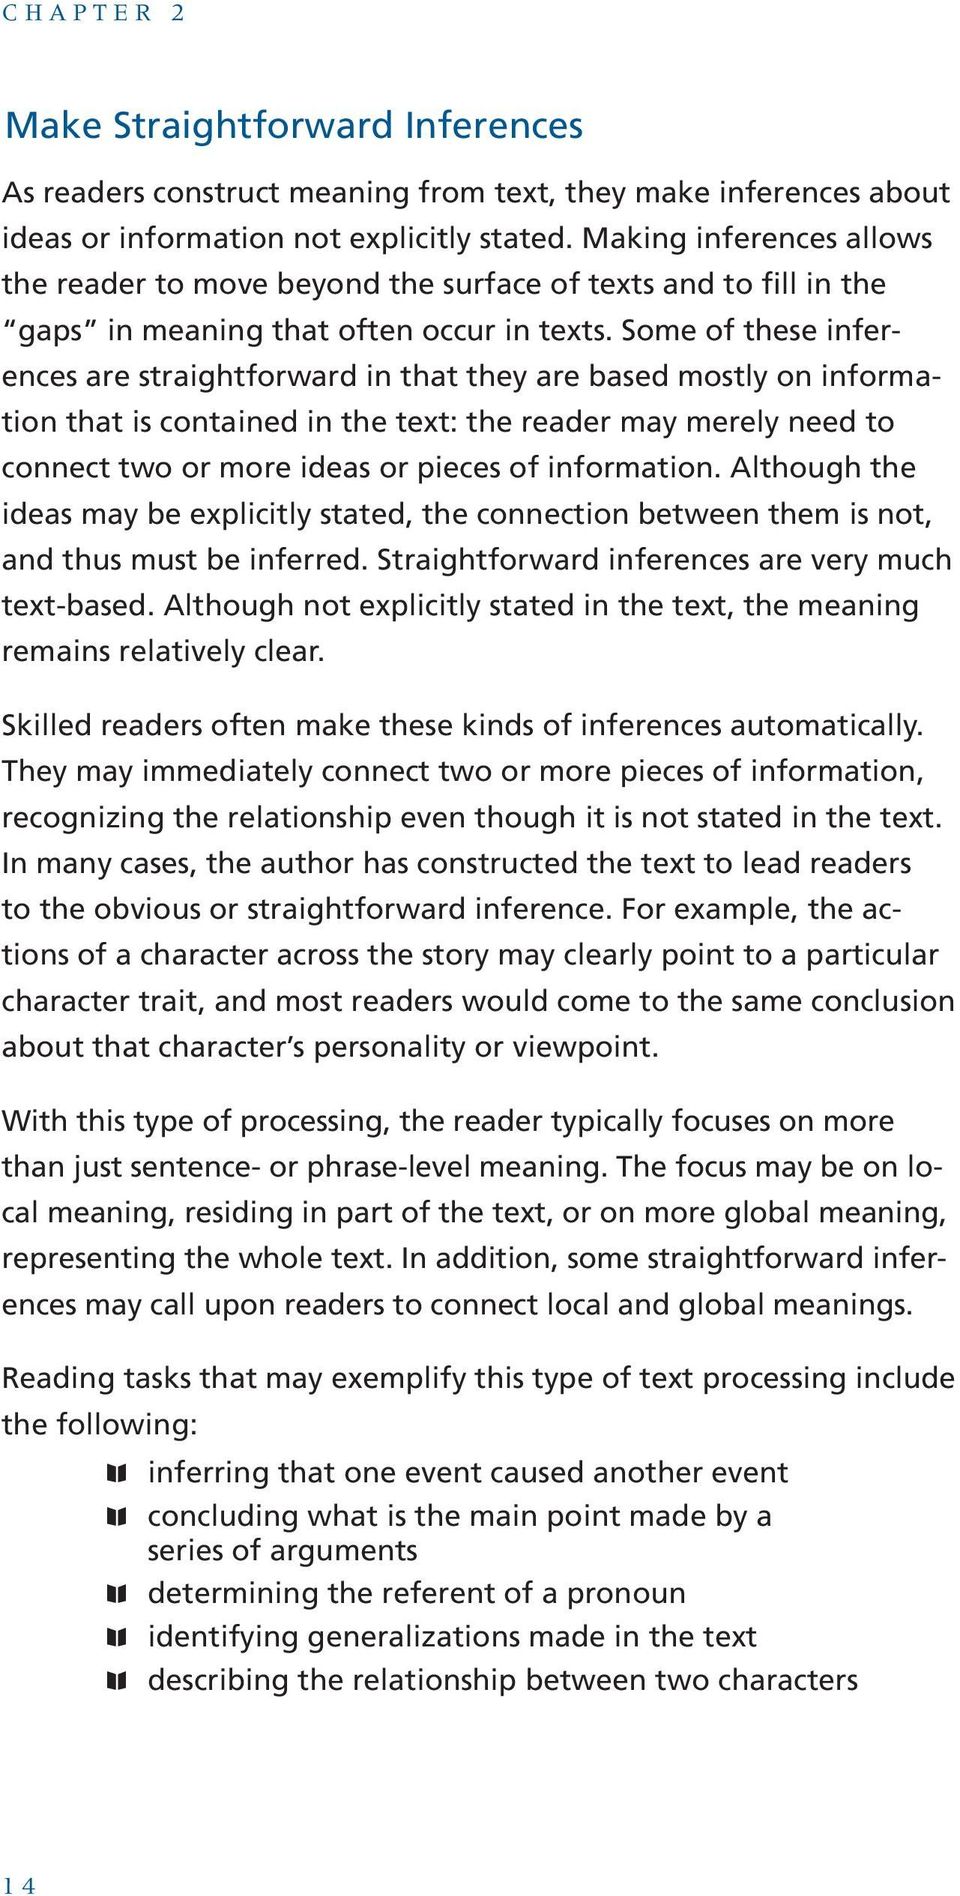 Some of these inferences are straightforward in that they are based mostly on information that is contained in the text: the reader may merely need to connect two or more ideas or pieces of